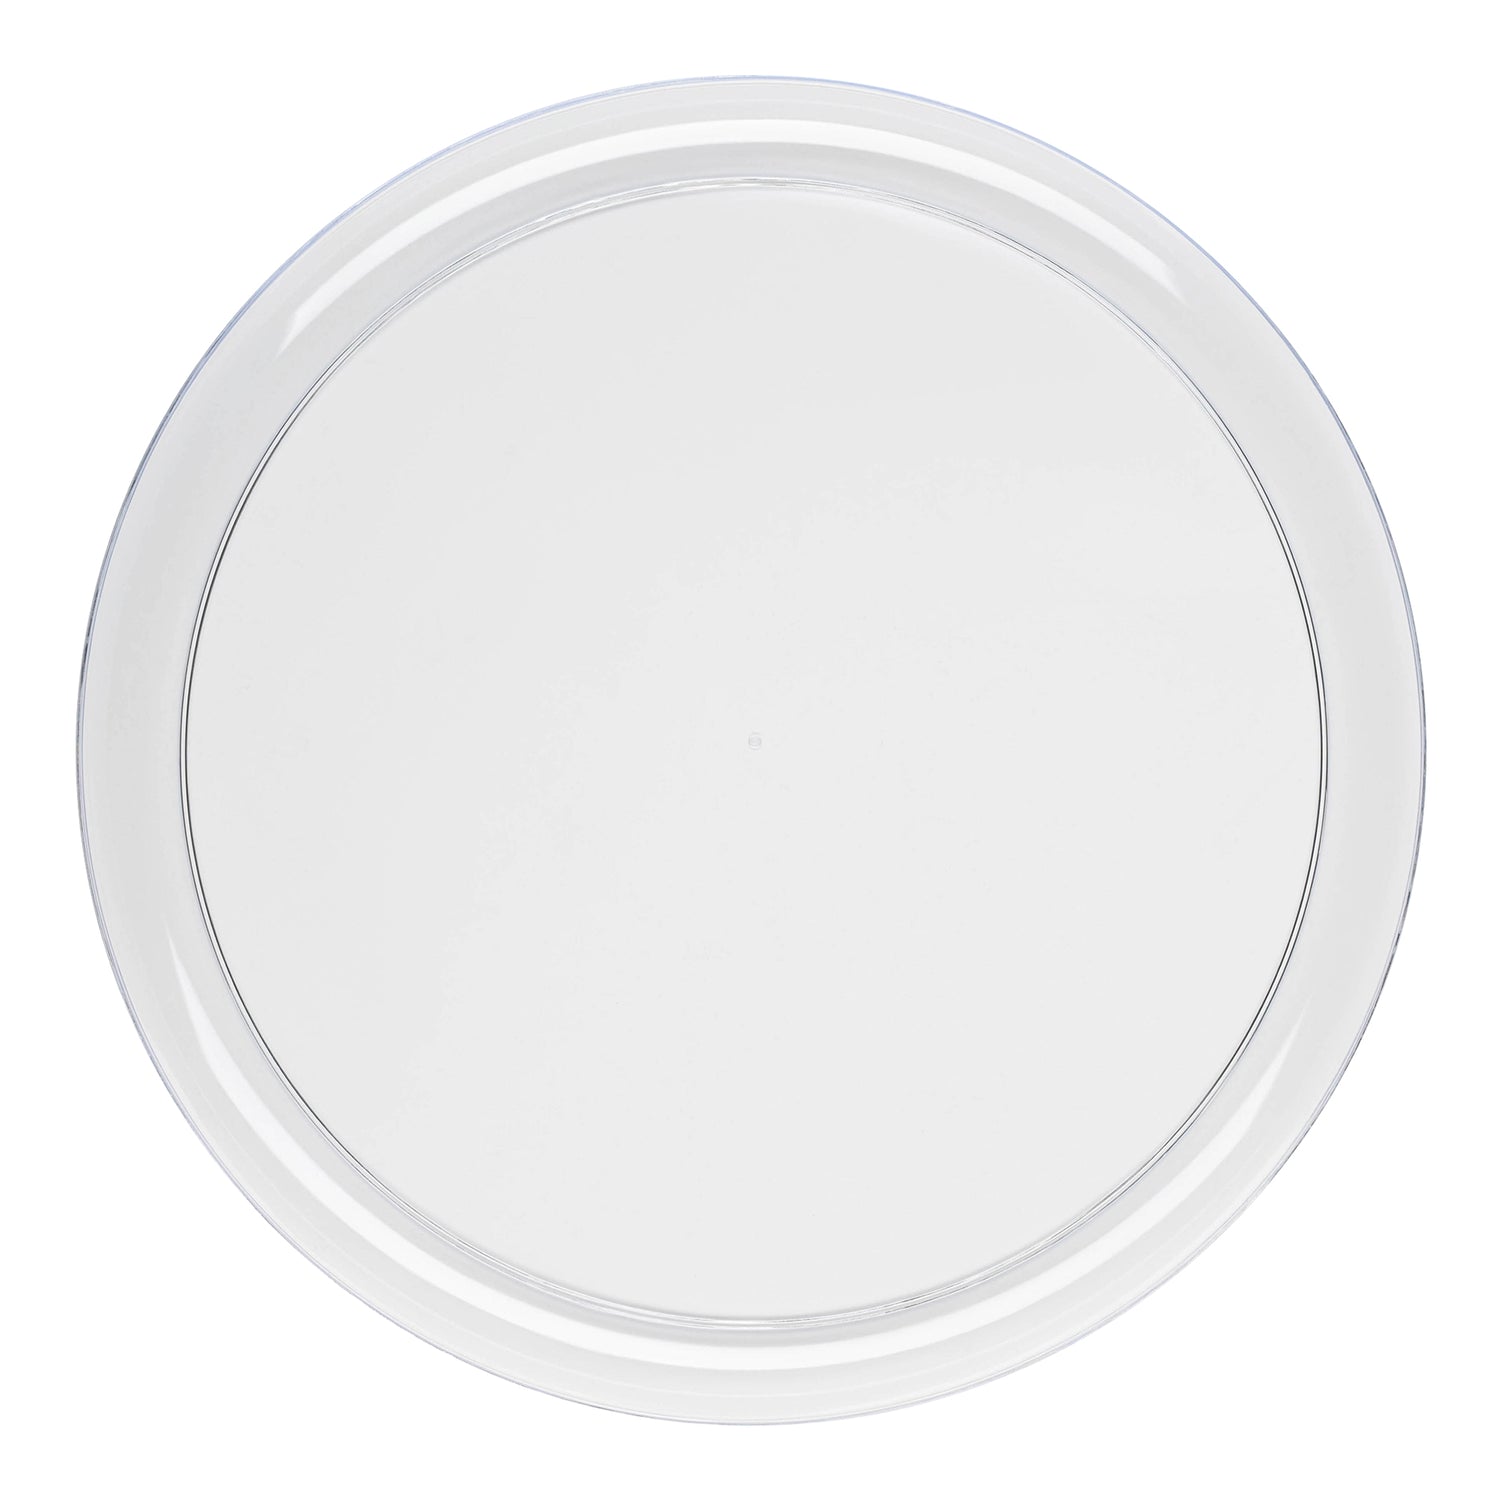 Clear Flat Round Disposable Plastic Appetizer/Salad Plates (8.5") | The Kaya Collection